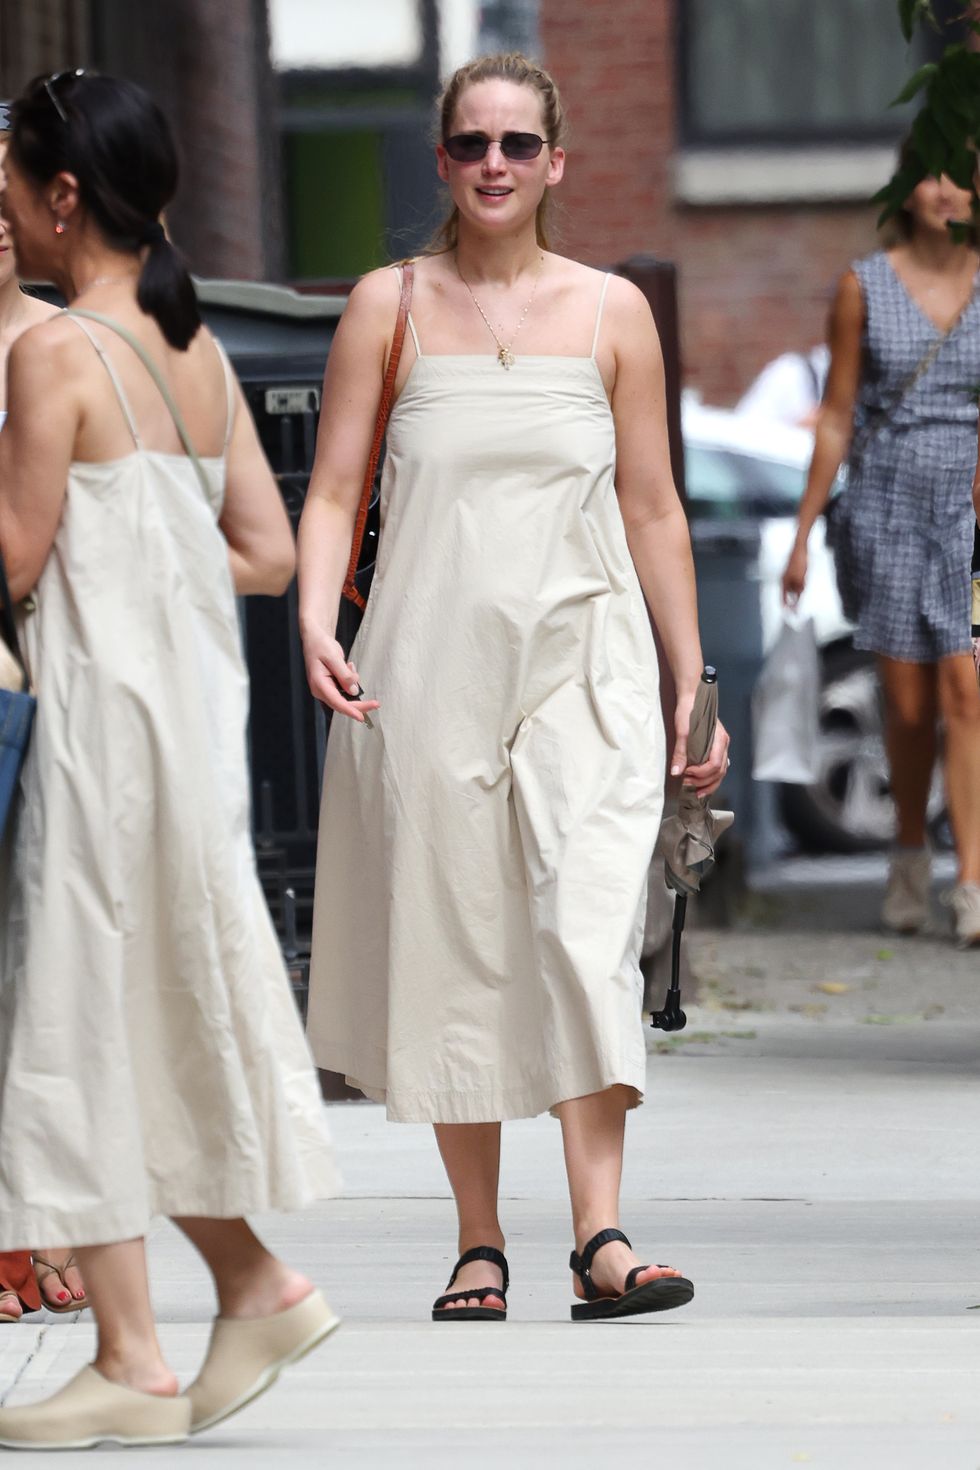 07312022 exclusive jennifer lawrence is pictured admiring a woman who is wearing the same dress as herself in new york city the american actress carried a black leather bag and wore a yellow sundress, and black sandalssalestheimagedirectcom please bylinetheimagedirectcomexclusive please email salestheimagedirectcom for fees before use